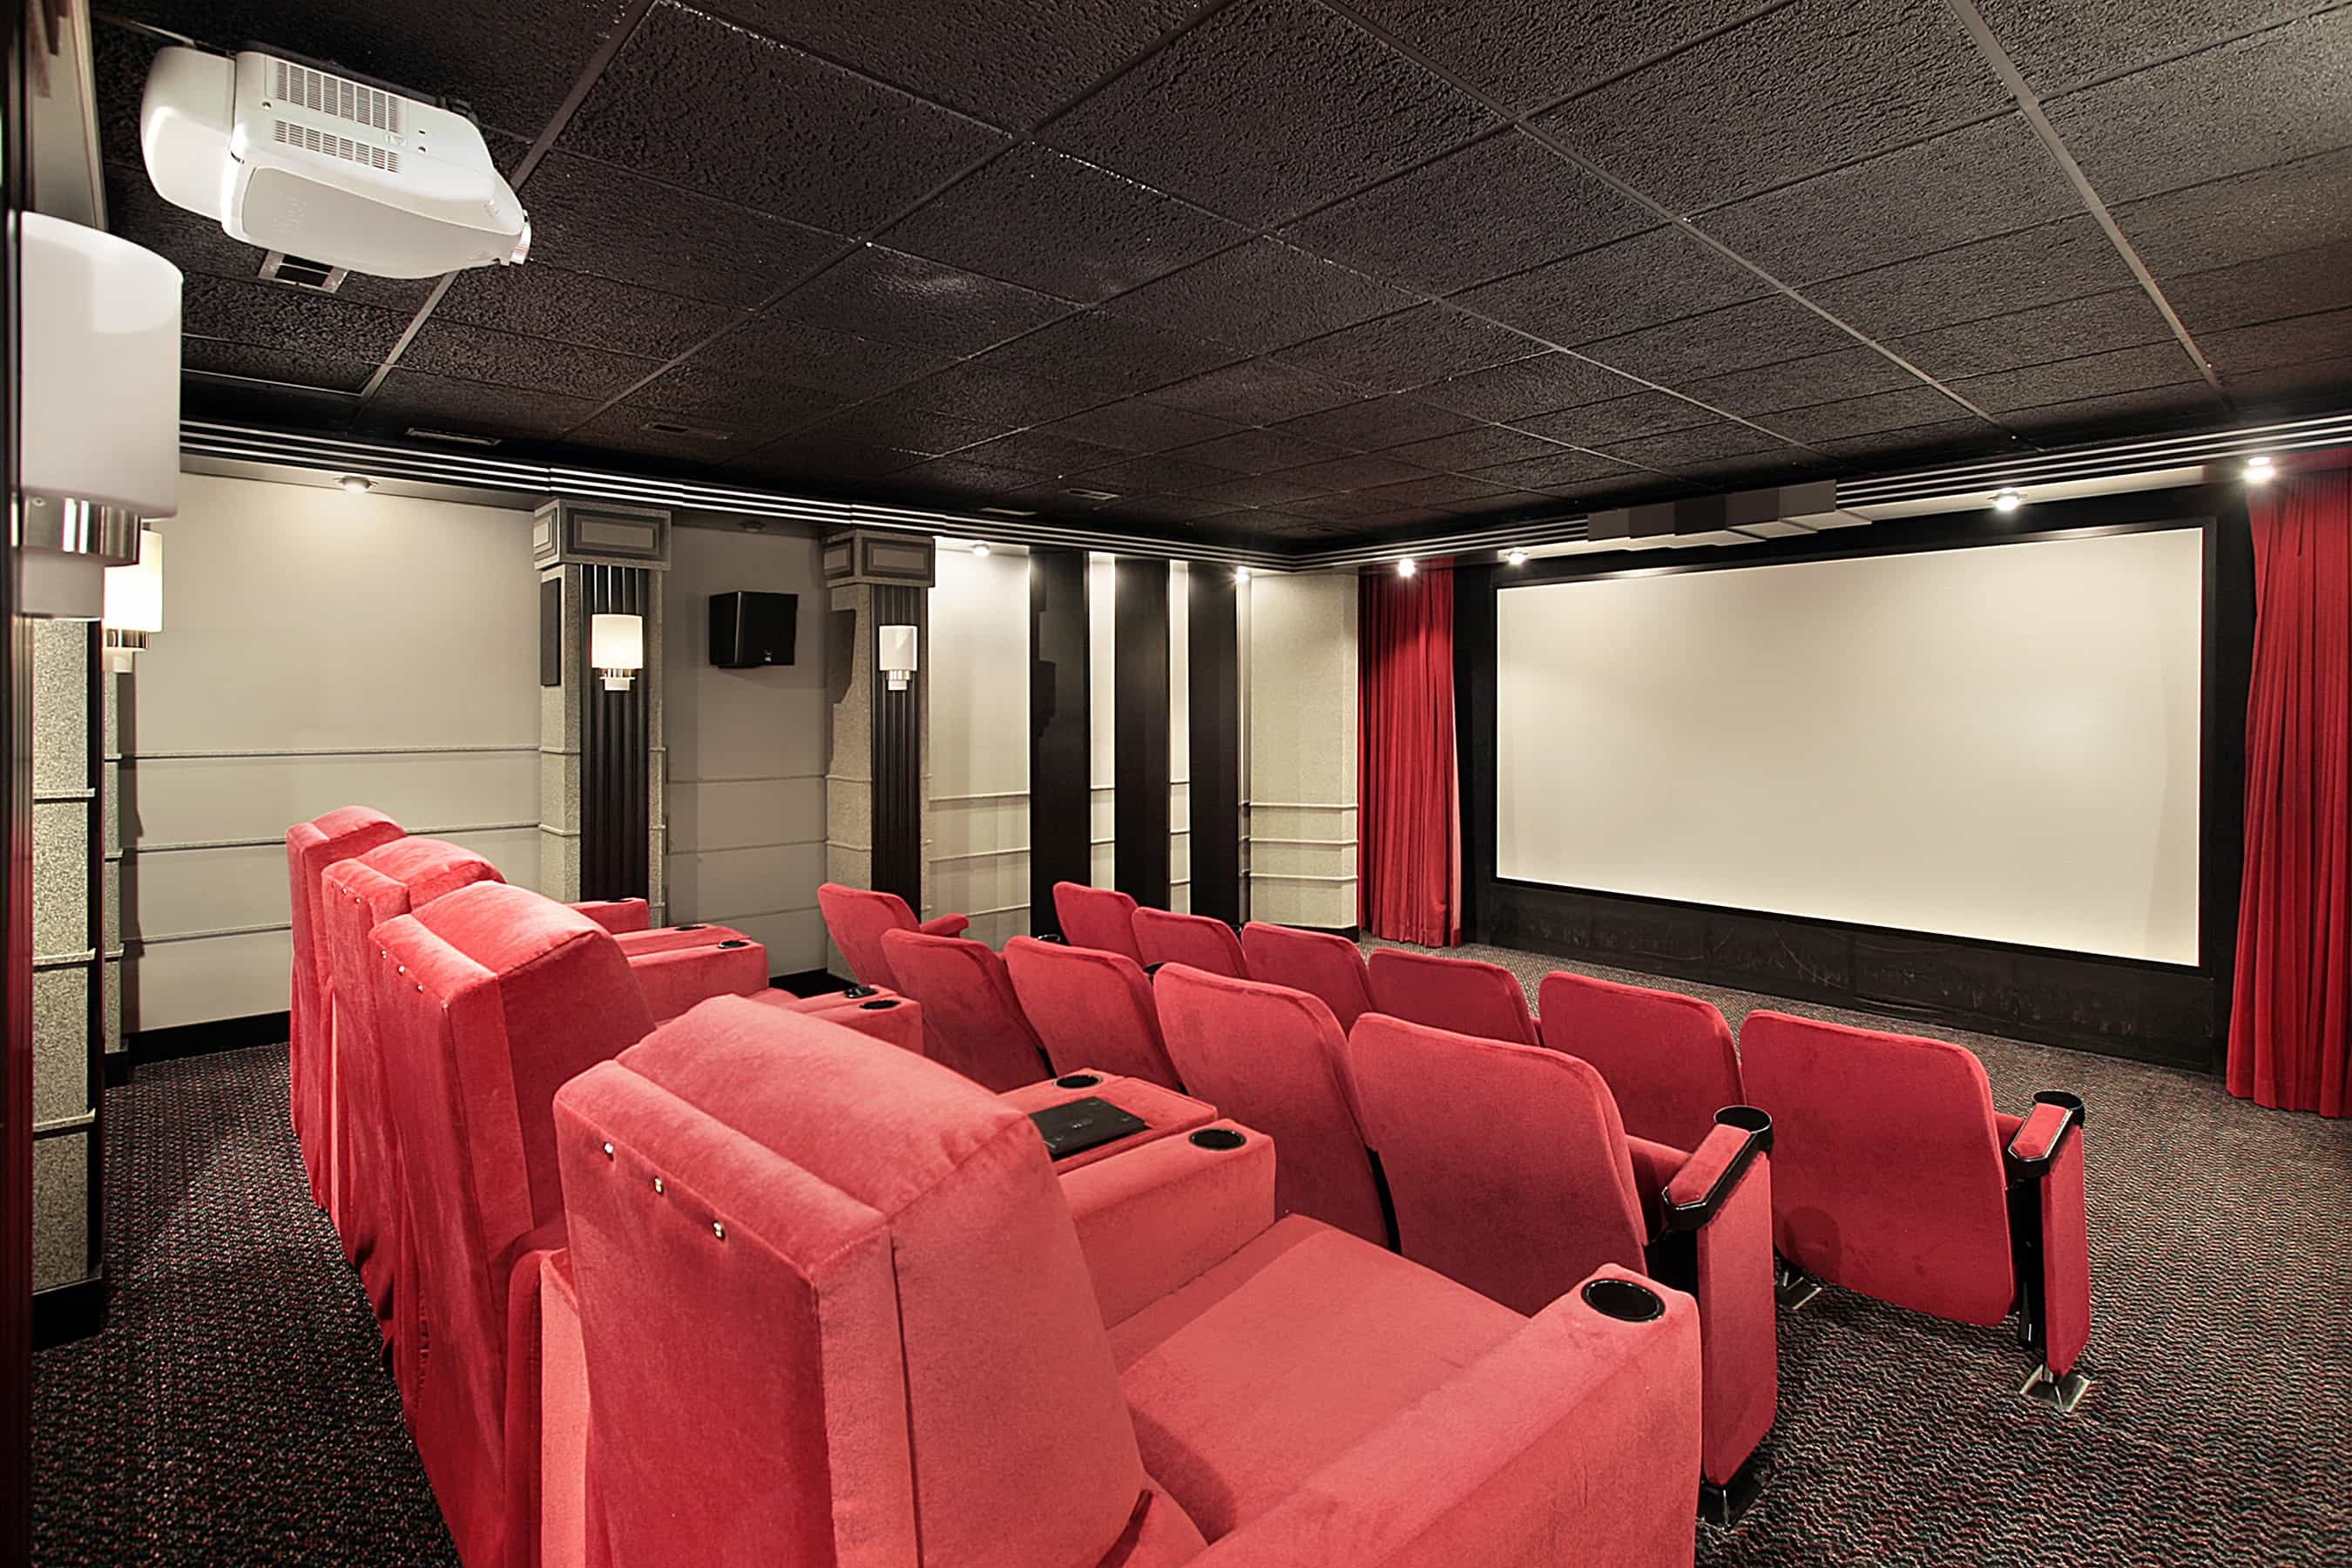 red black and white color themed at home theater with red seats, red wall, and large screen on wall.